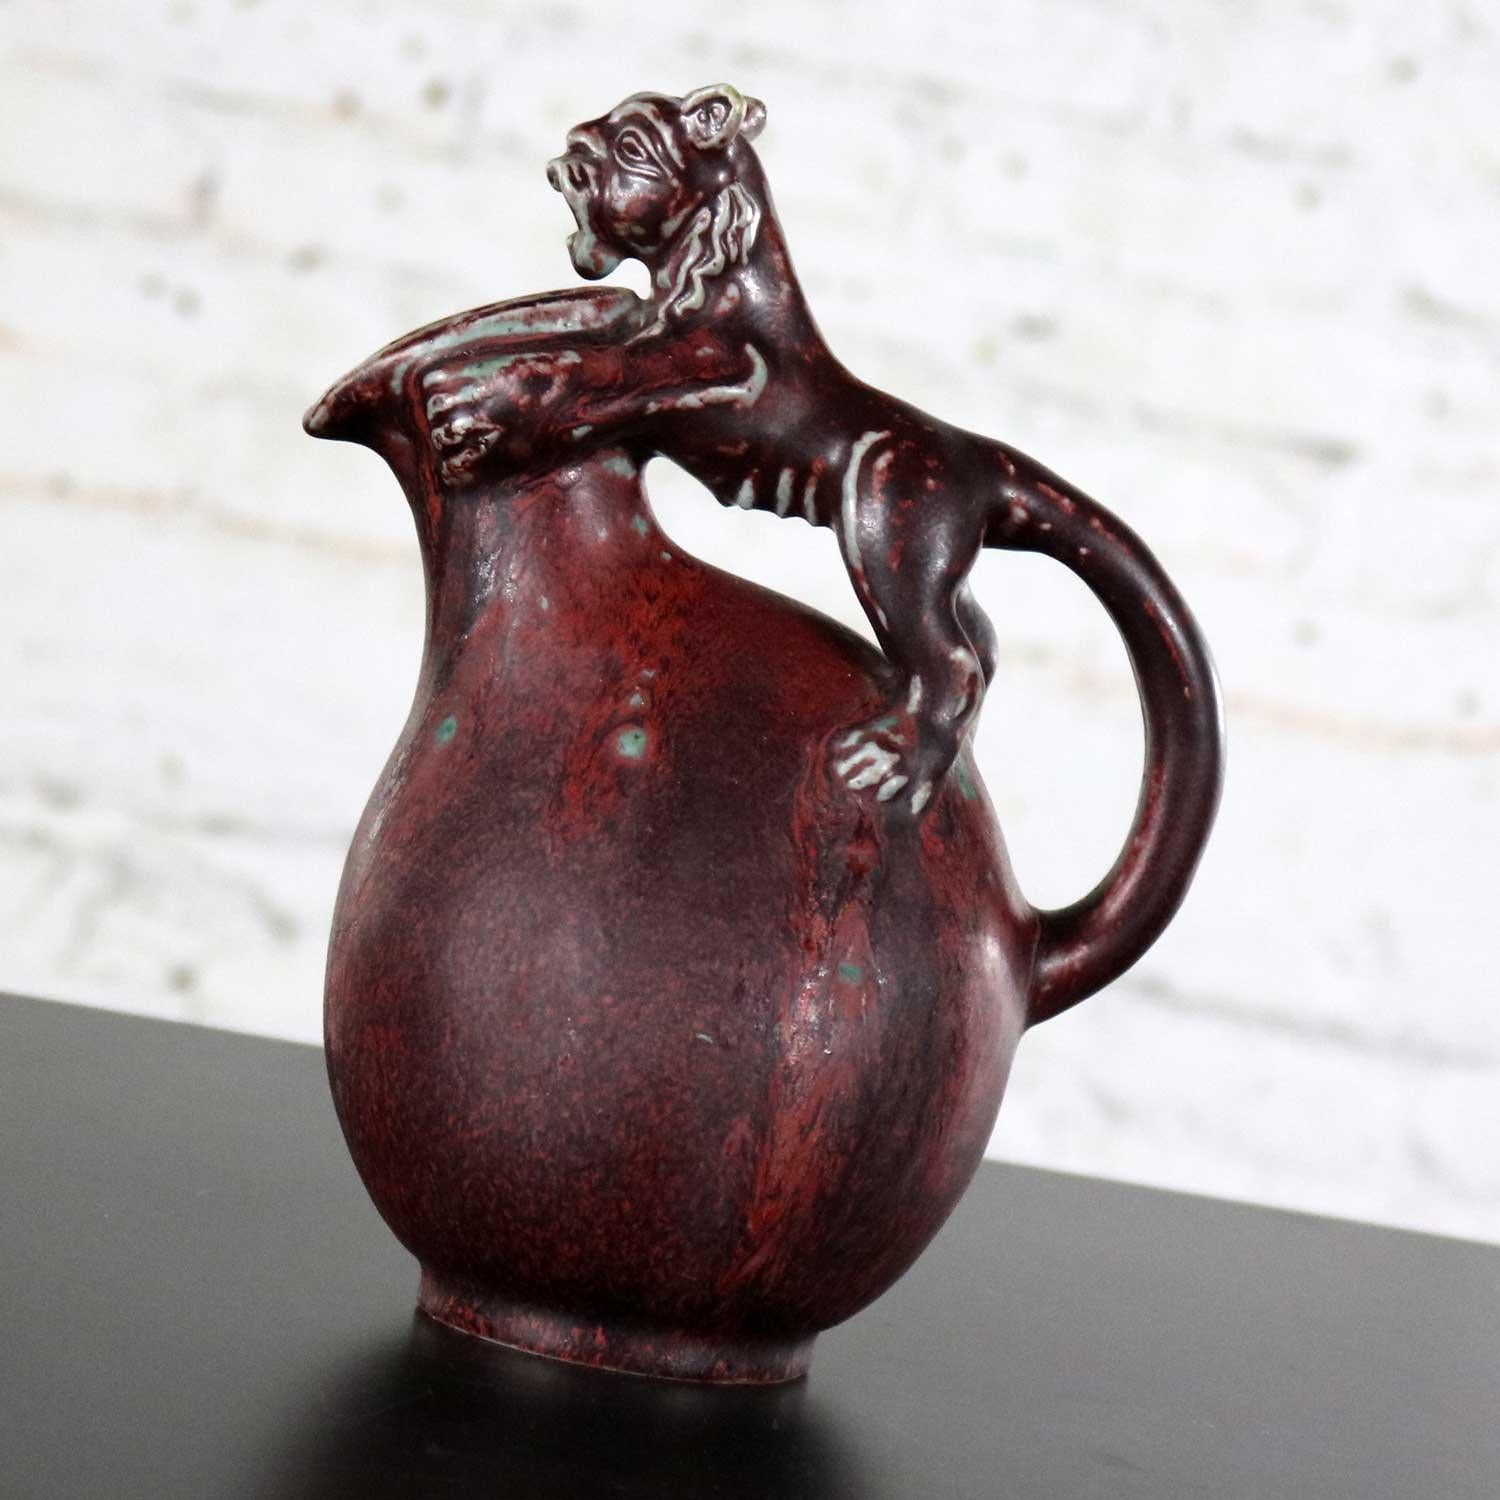 Handsome unique stoneware ceramic jug or ewer by Bode Willumsen for Royal Copenhagen. It is in an oxblood colored matt glaze and features a full body lion as the handle. Marked with Royal Copenhagen (crown) Denmark and the three rivers mark. You can